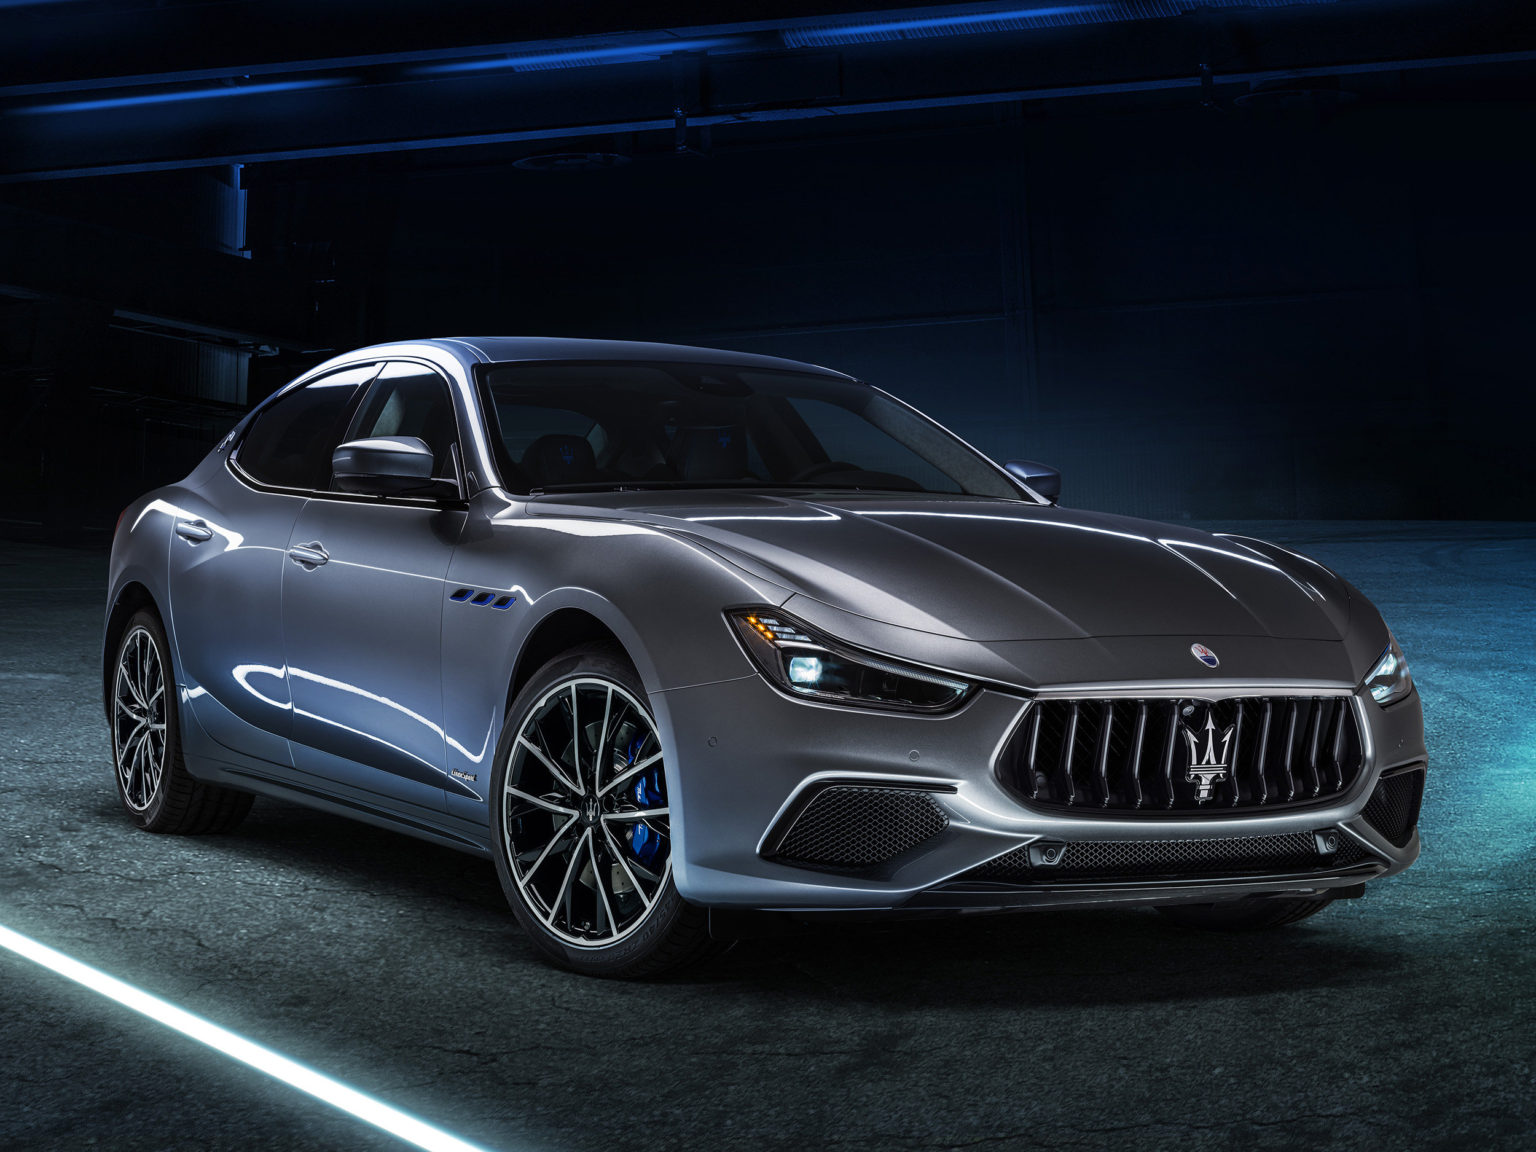 The 2021 Maserati Ghibli Hybrid is the company's first electrified vehicle.